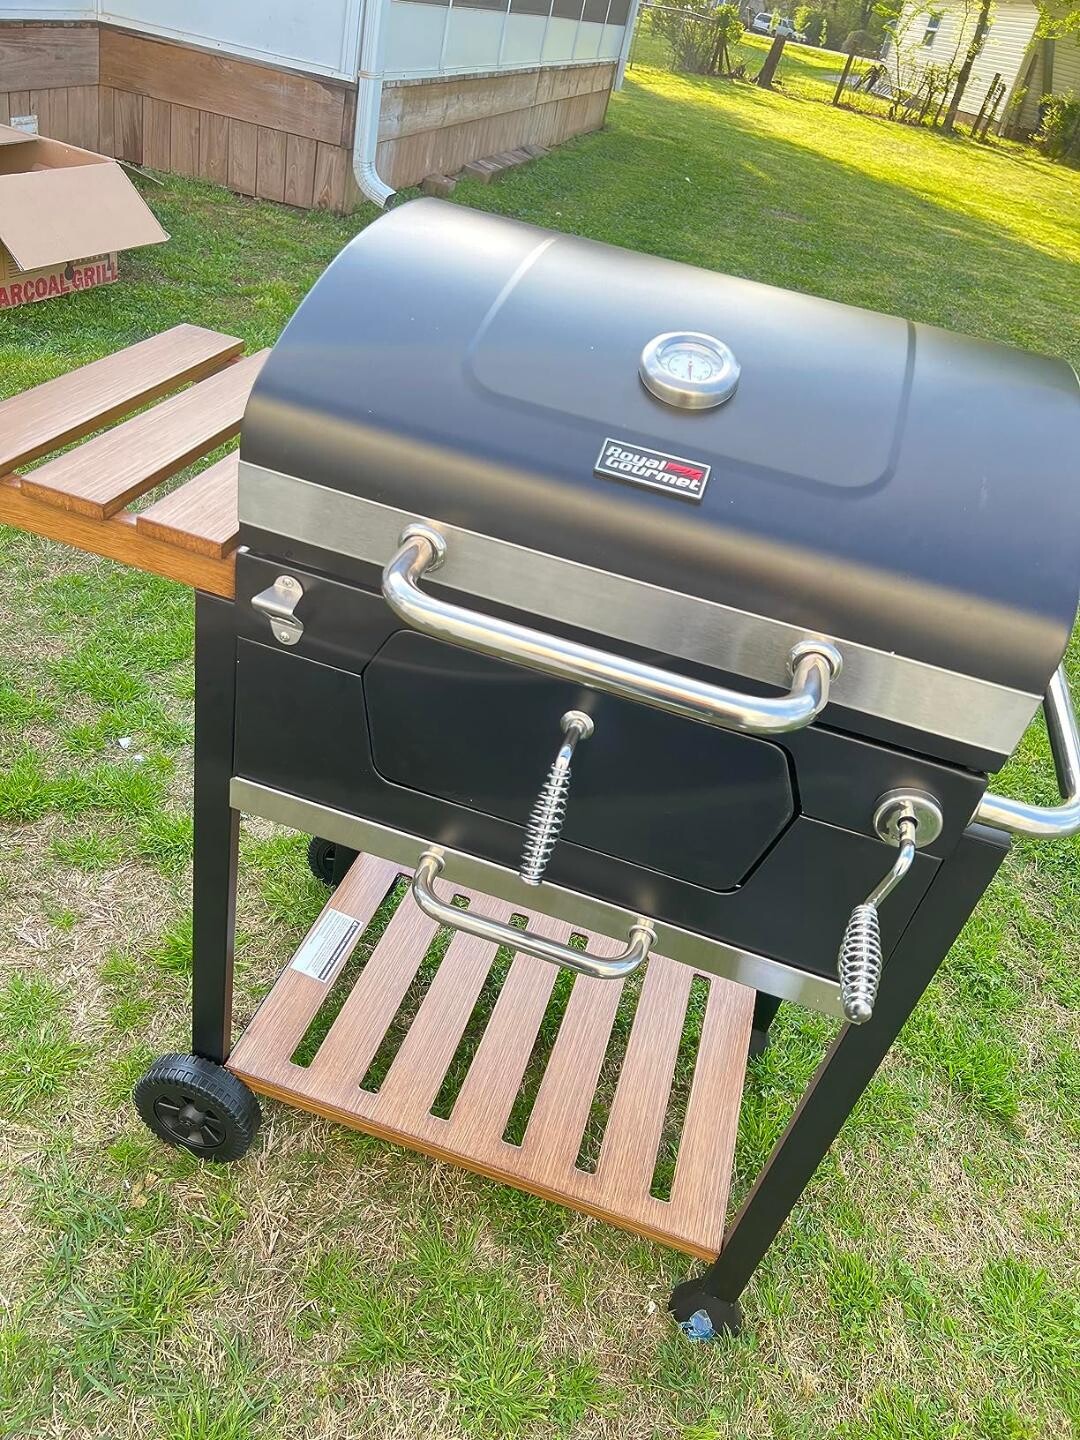 Master the Art of Outdoor Grilling: 24-Inch Charcoal Grill and BBQ Smoker with Convenient Handle and Folding Table - Ideal for Perfecting Your Grilling Skills in the Patio, Garden, and Backyard